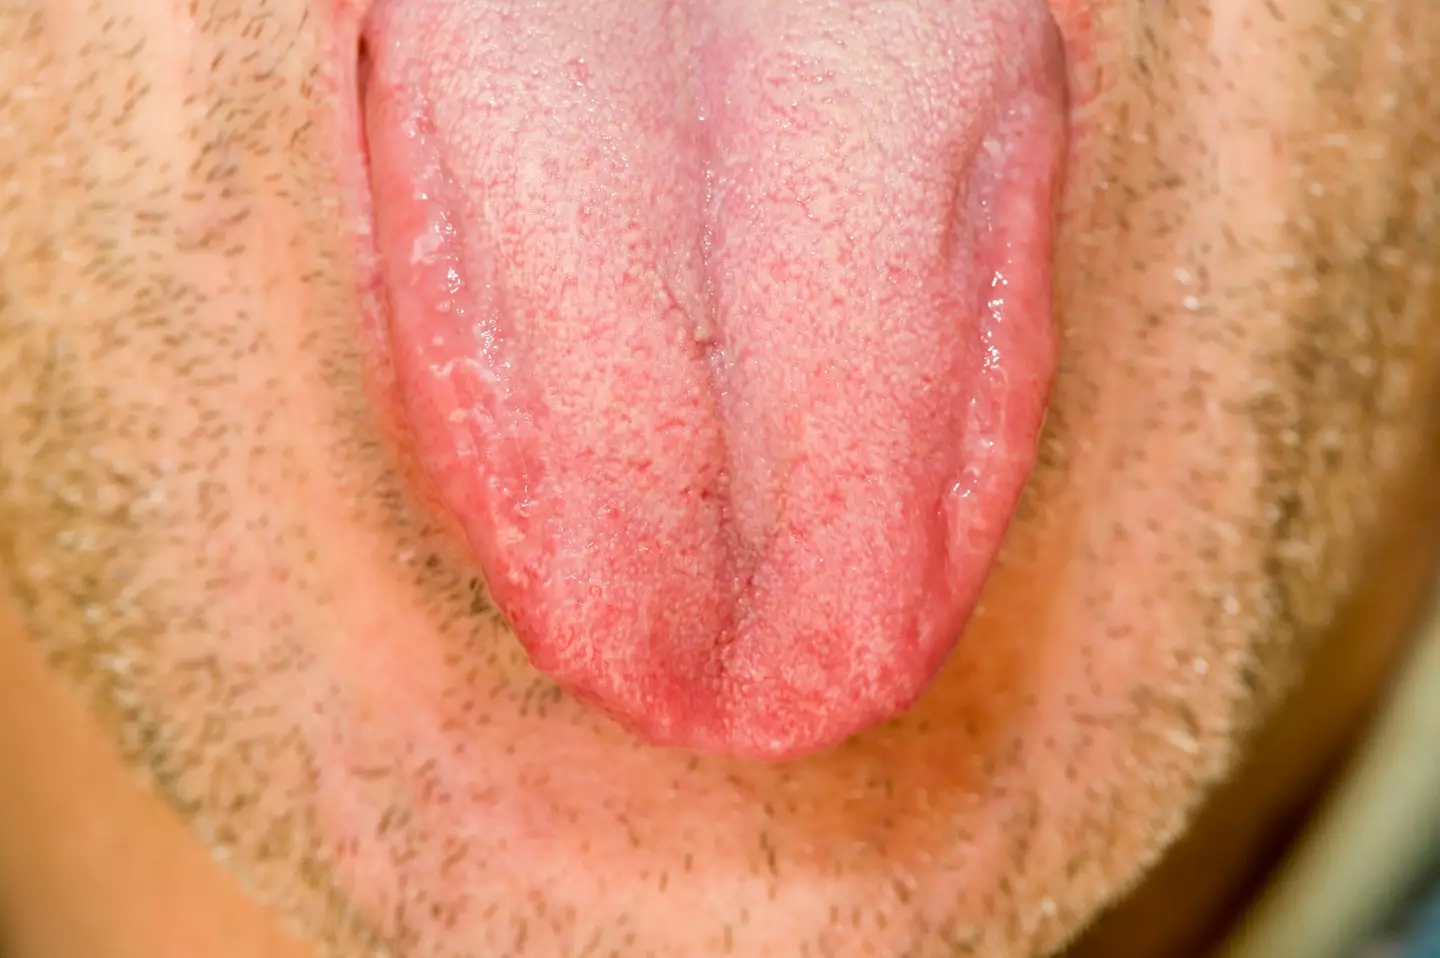 Your sense of taste could be weakened by vaper's tongue.